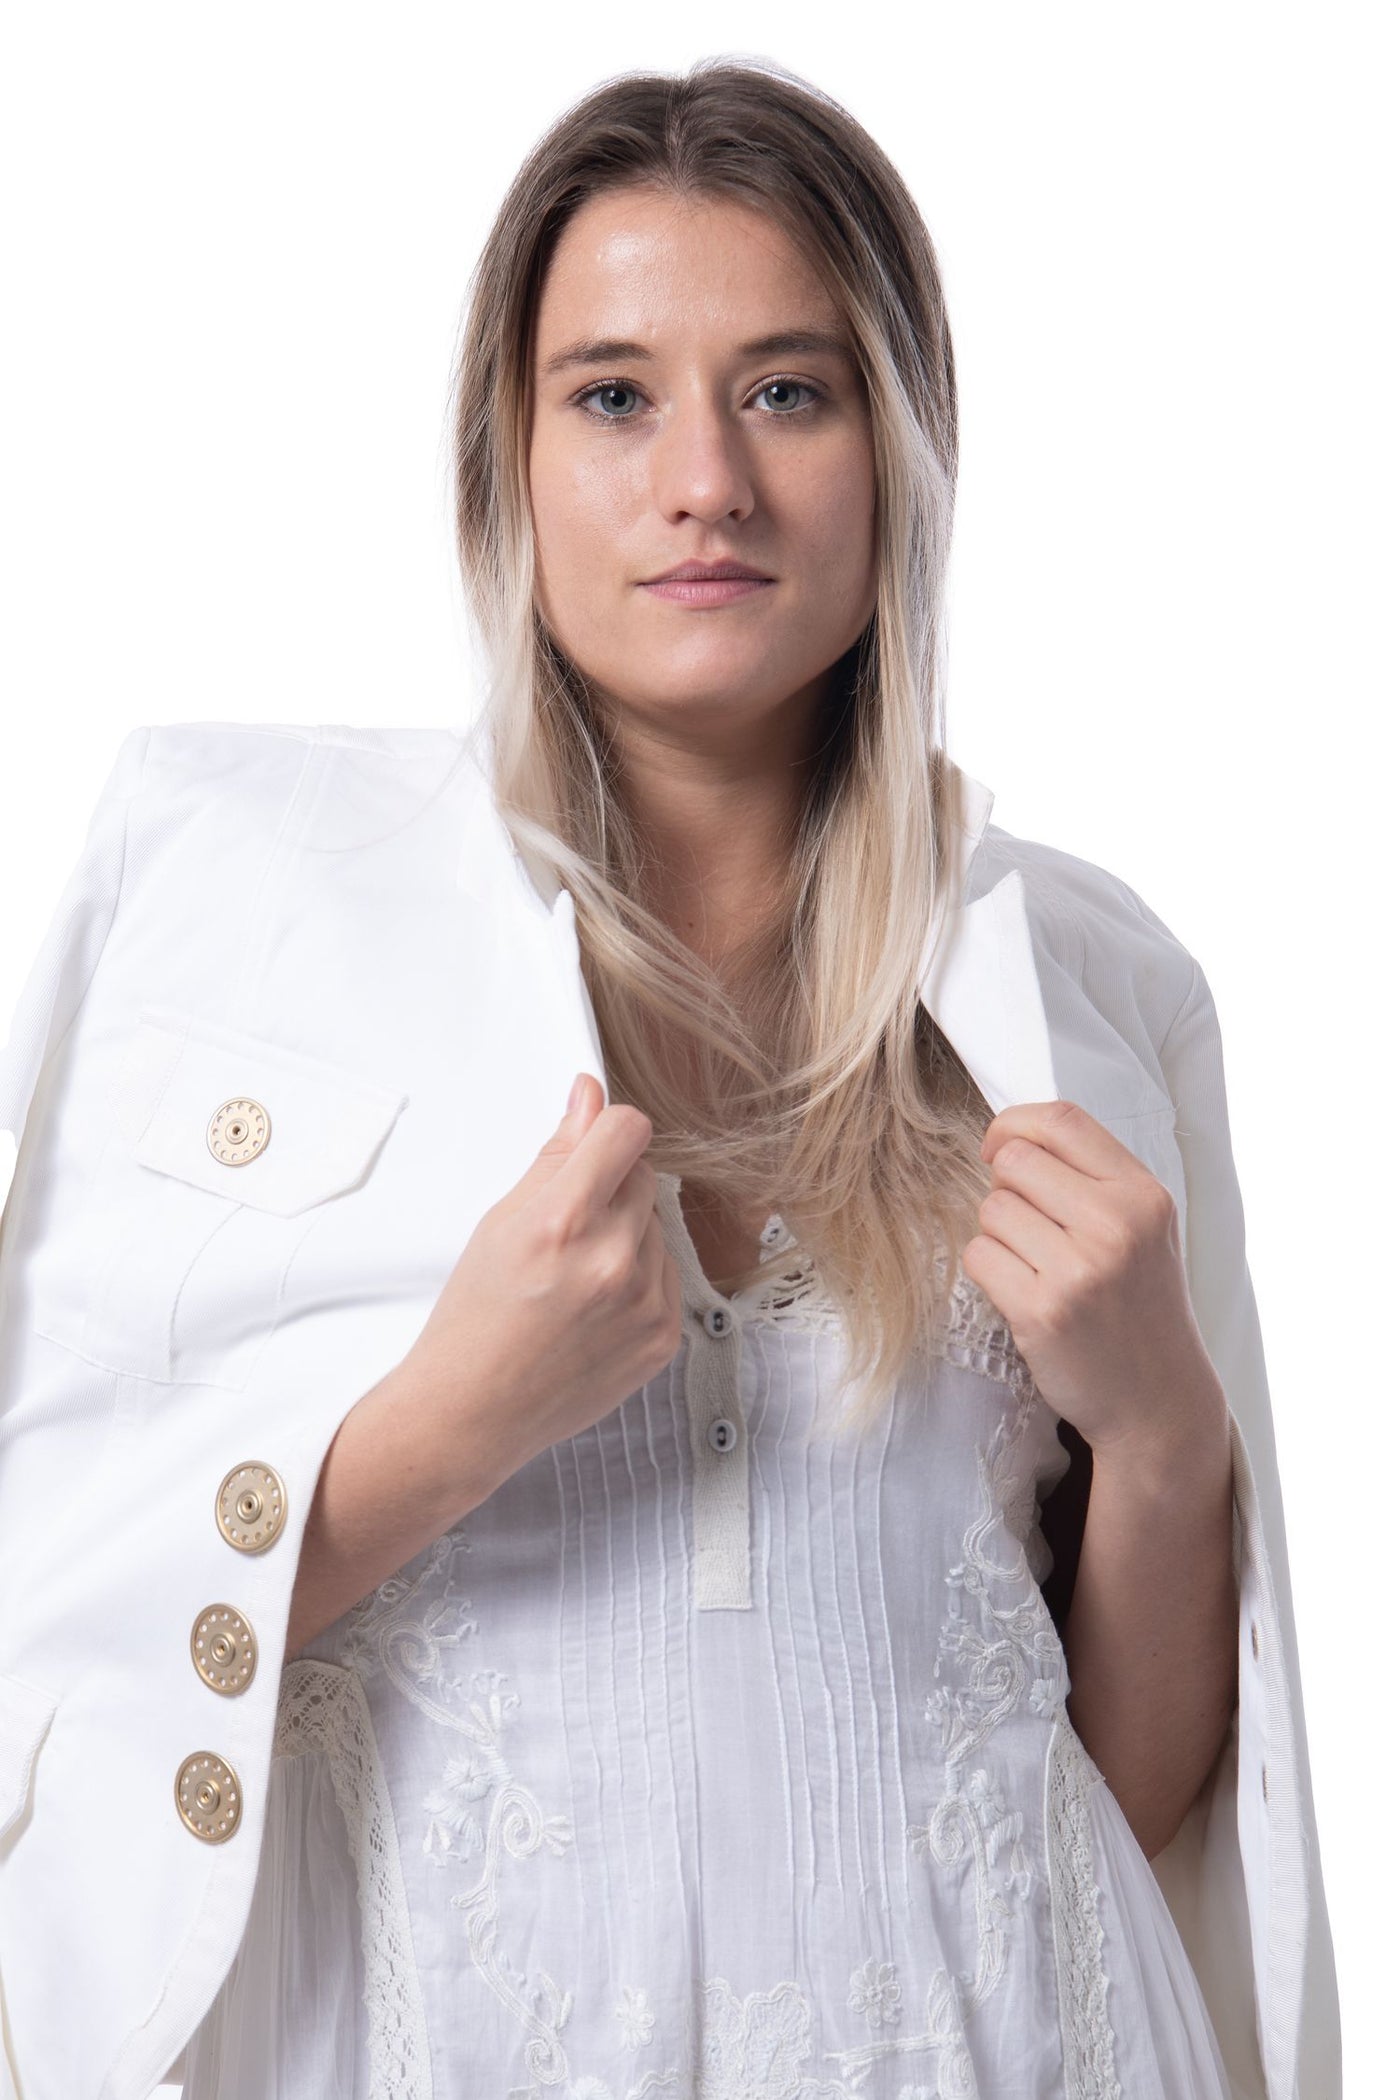 Airfield denim white jacket with gold detailing